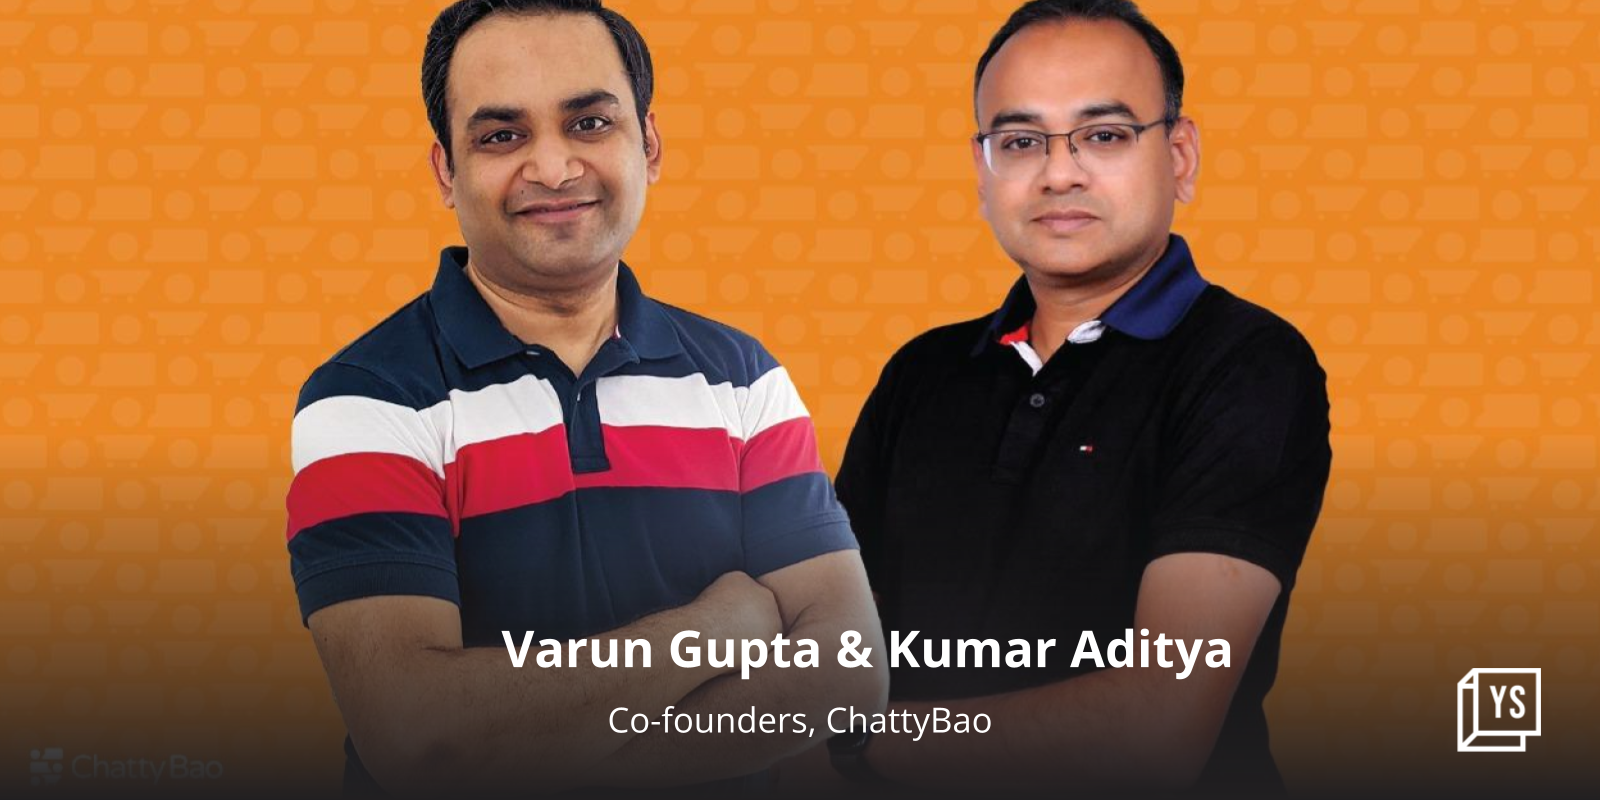 ChattyBao Technologies raises over $5M led by Info Edge, Vertex Ventures